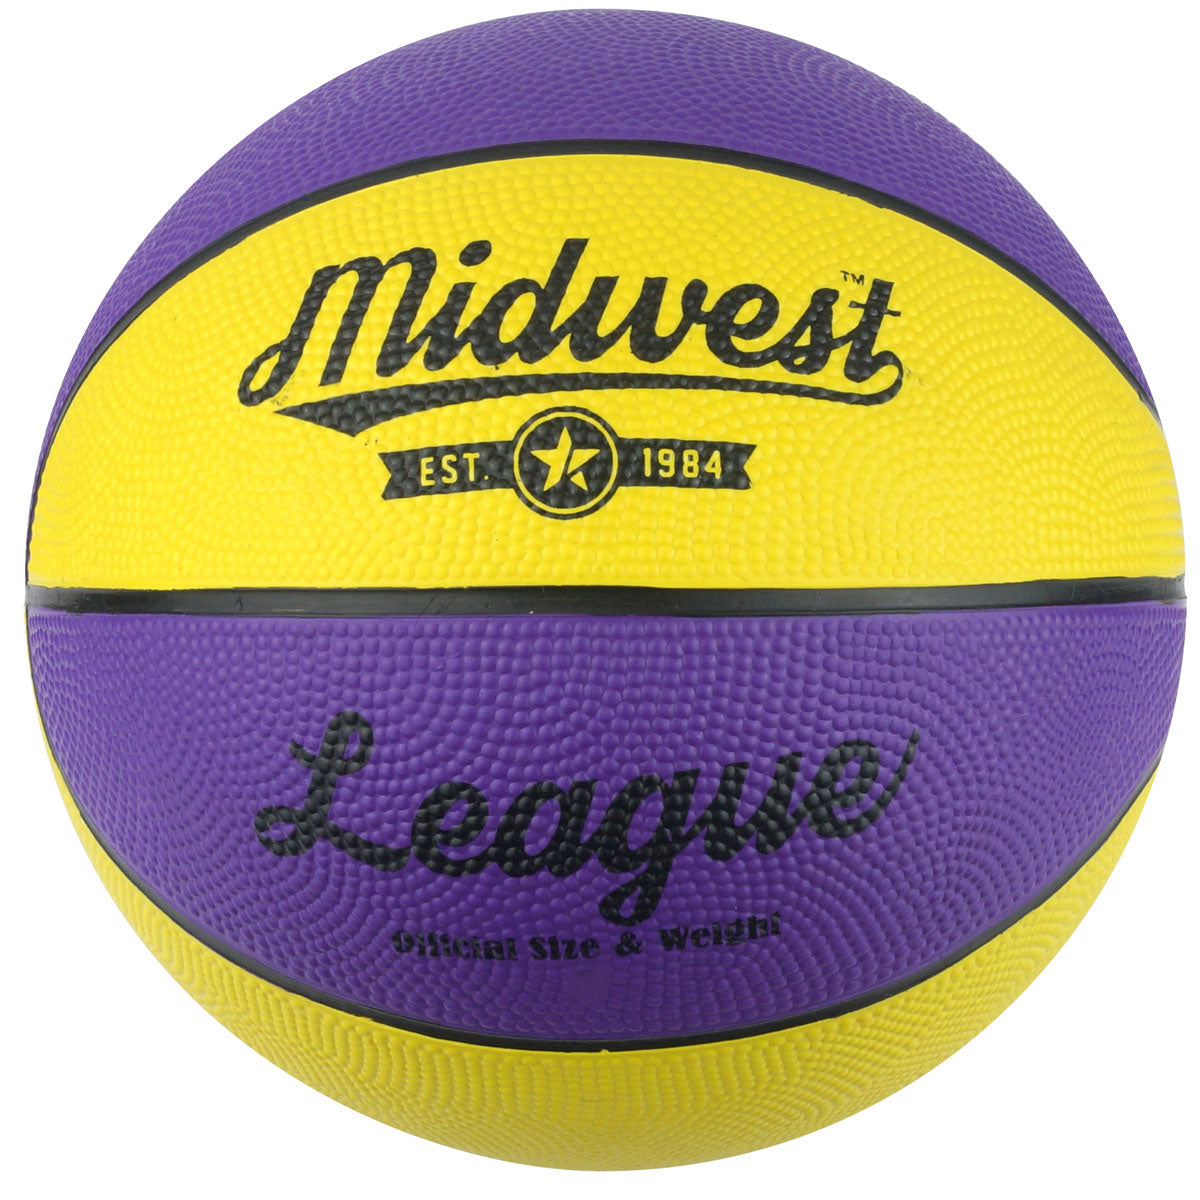 Midwest League Basketball - Size 7